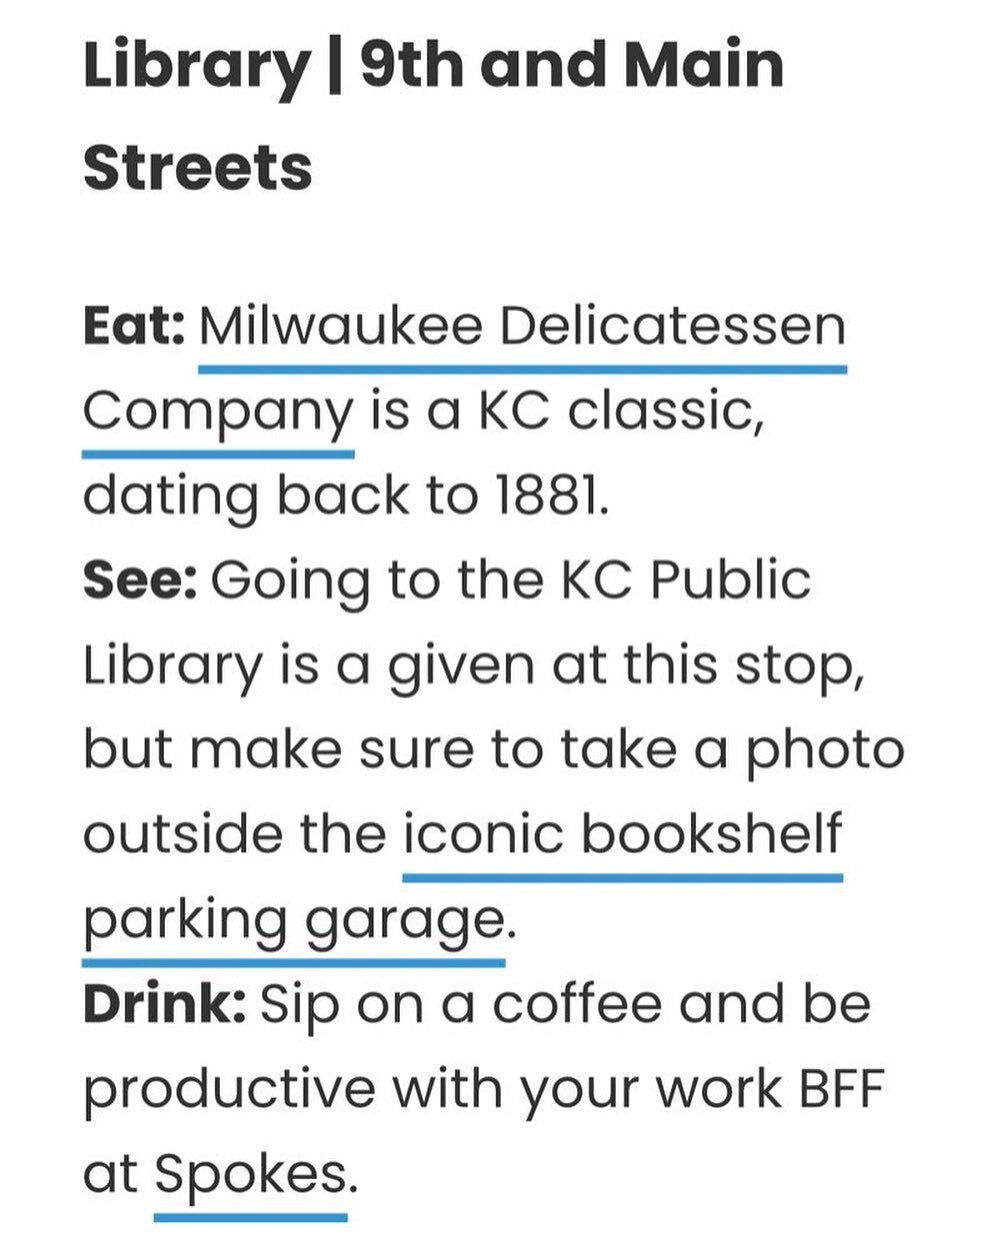 Thank you to @thekctoday for including our Walnut shop among their must-see attractions near the @kcstreetcar stops in today&rsquo;s newsletter! 

We love their suggestions. Any/all kinds of BFFs welcome. Productivity optional.